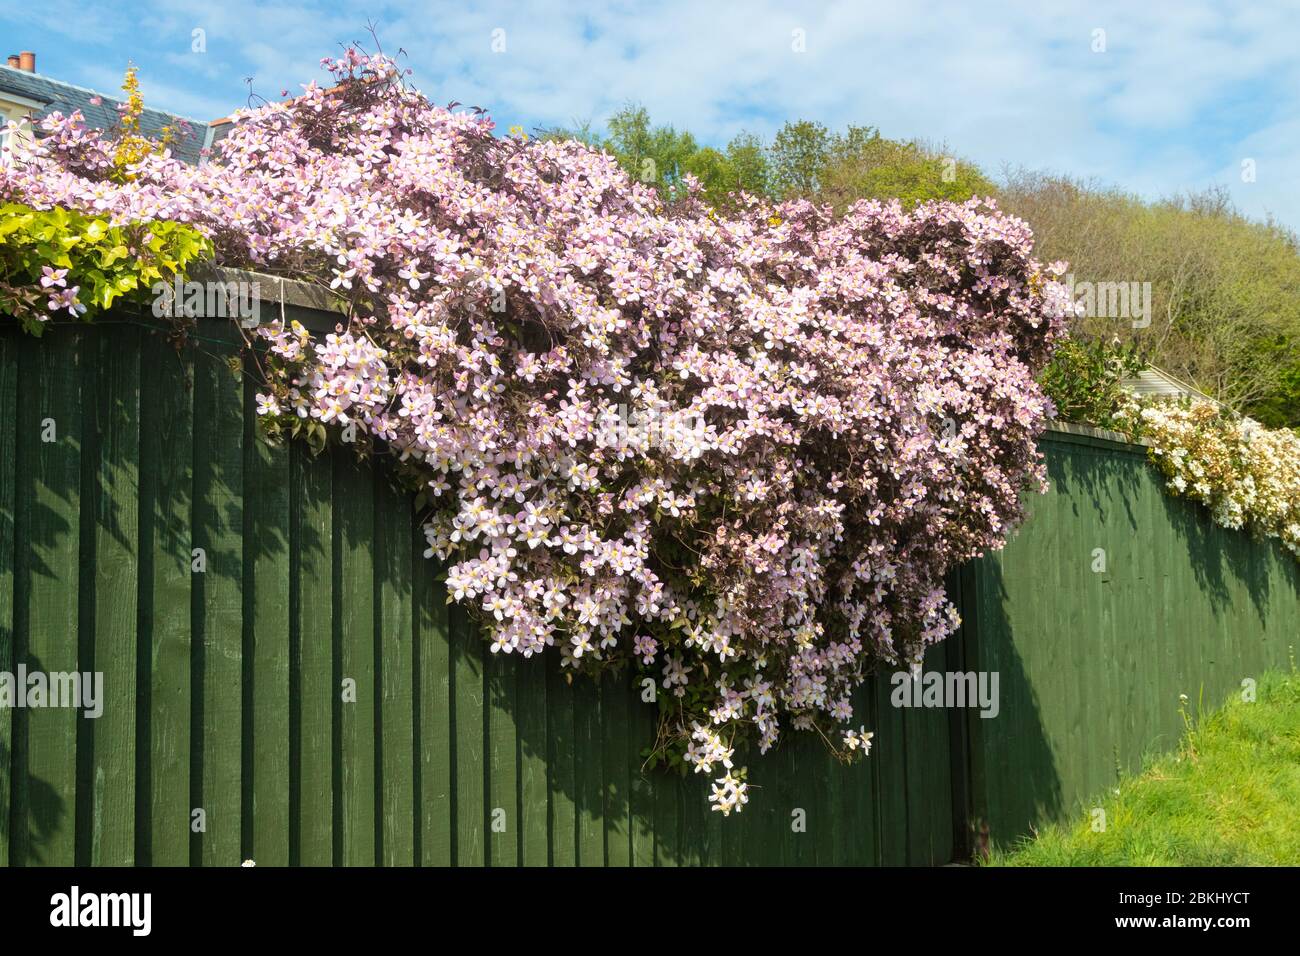 A mass of Clematis drapes over a wooden fence. Stock Photo